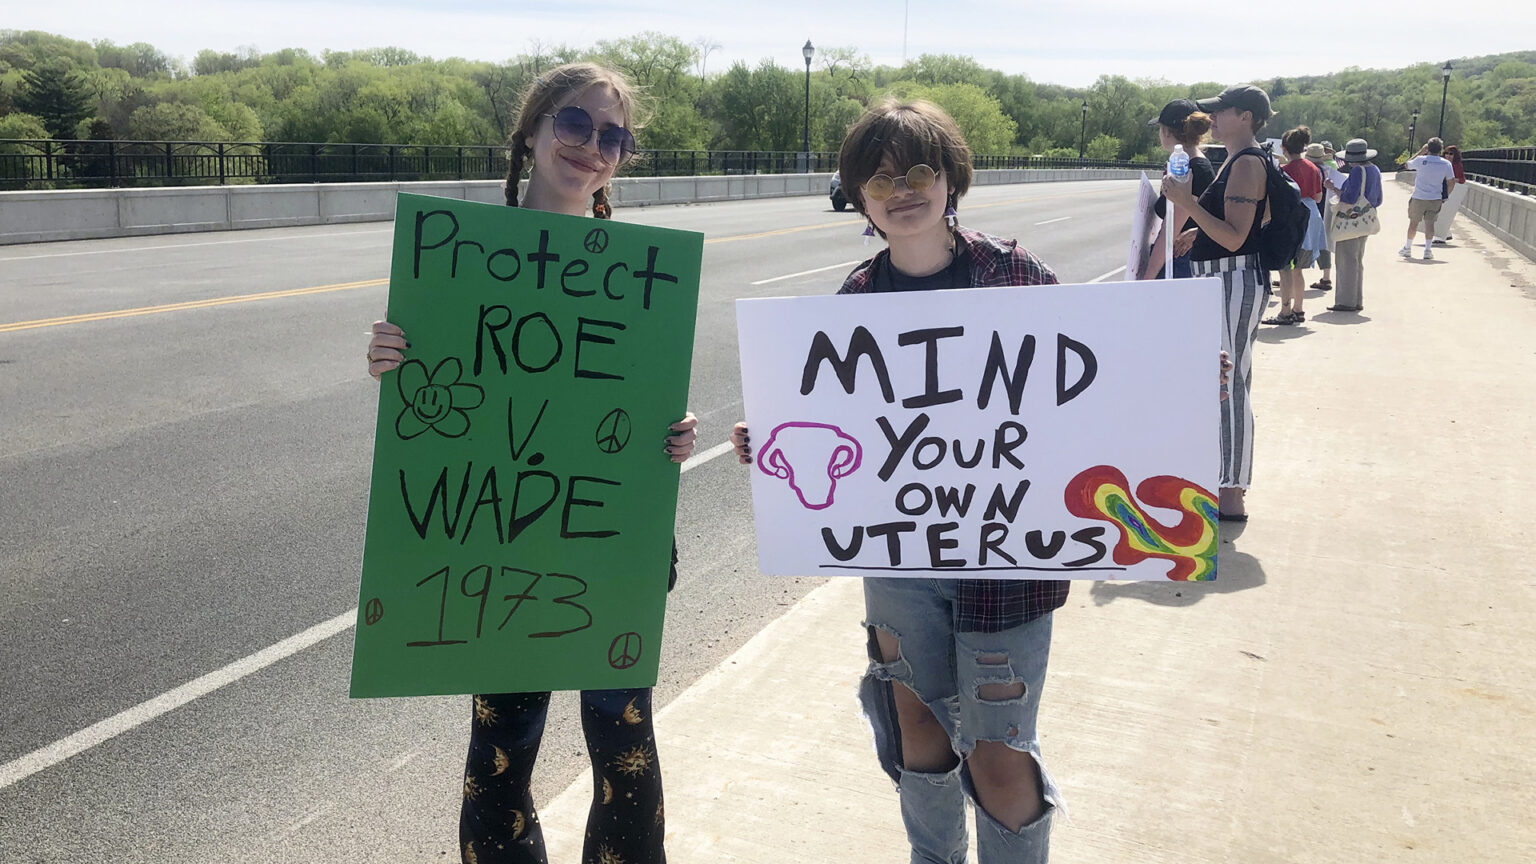 Two protestors standing on a bridge sidewalk hold signs reading Protect Roe v. Wade 1973 and Mind Your Own Uterus with other protestors standing in the background.